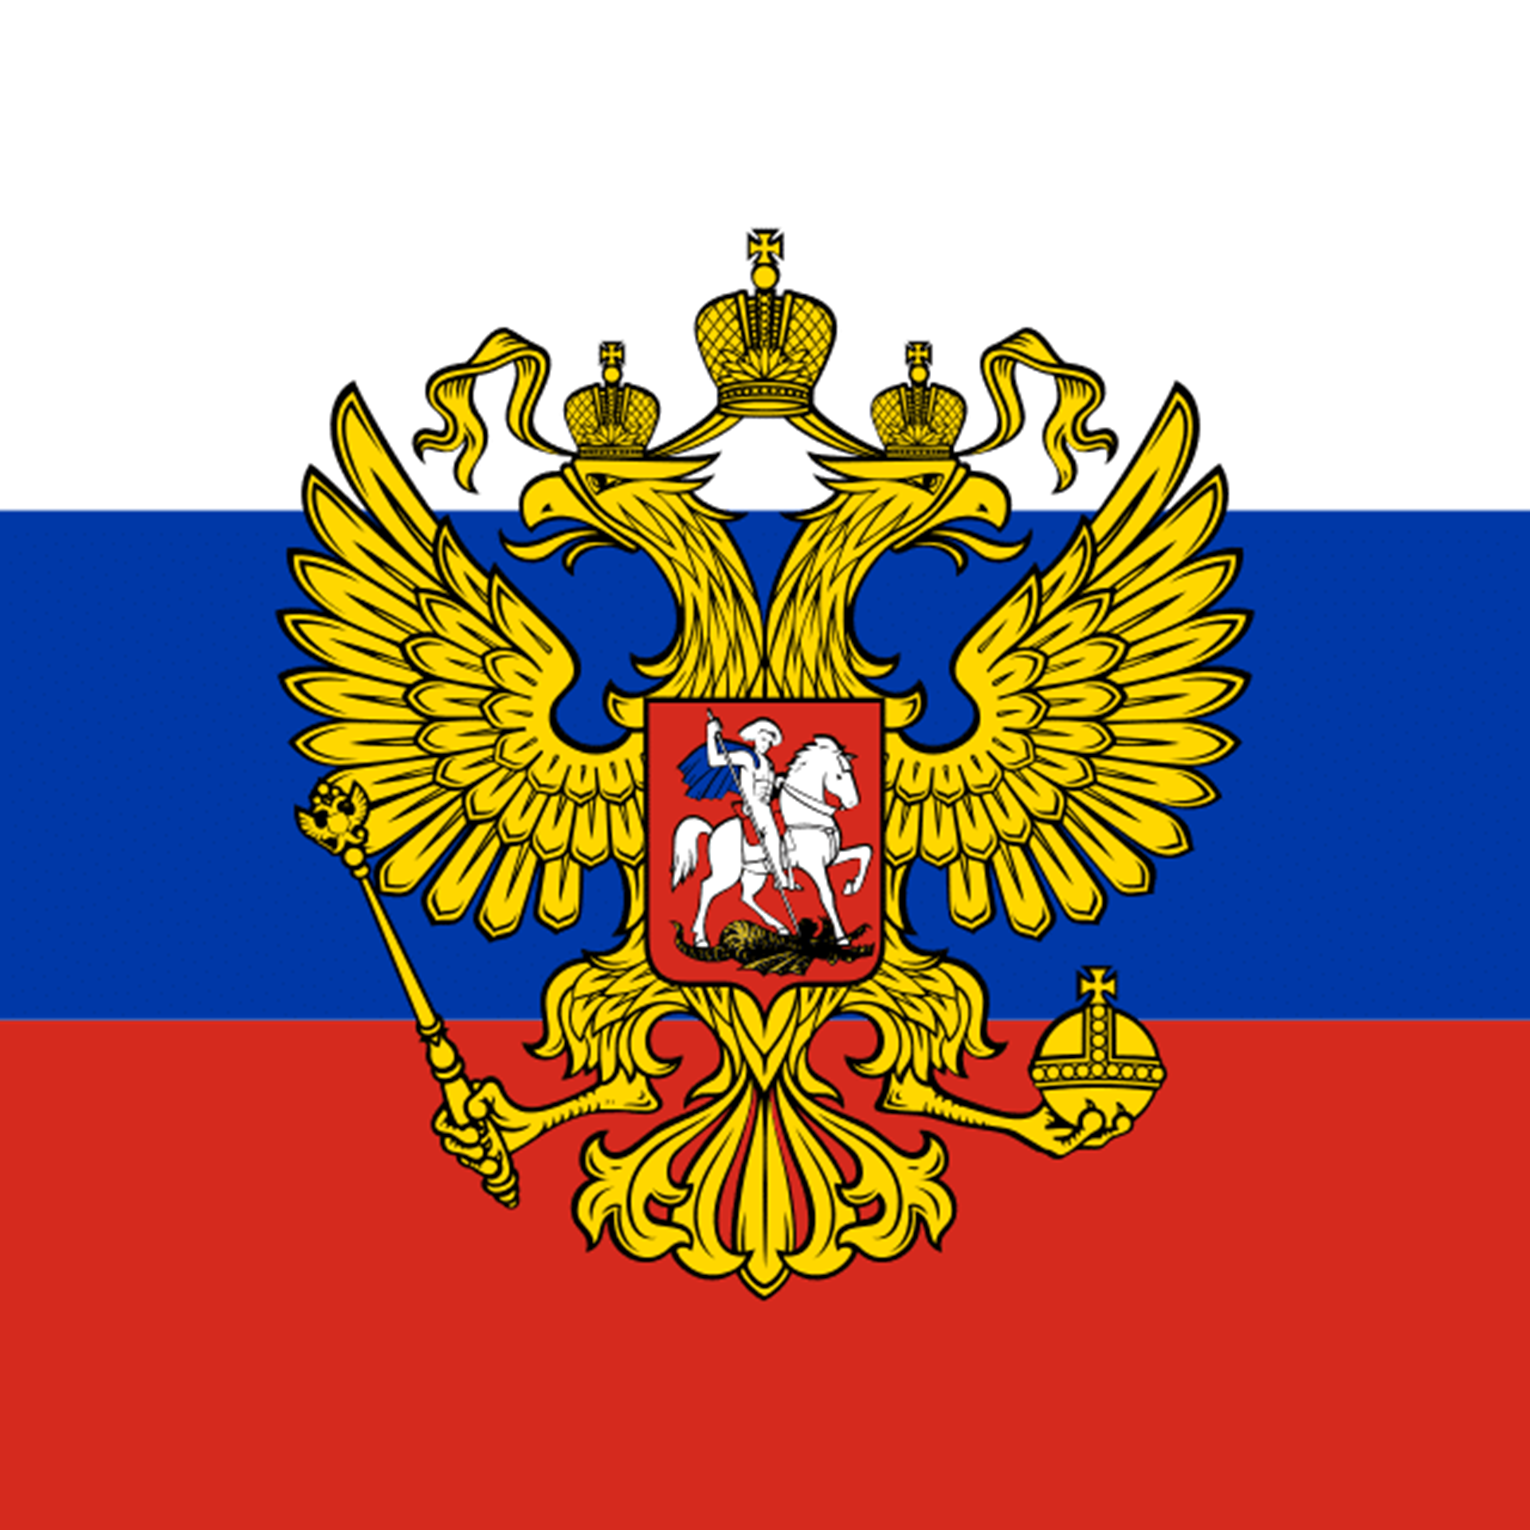 What is the population of Russia and what does the flag symbolise